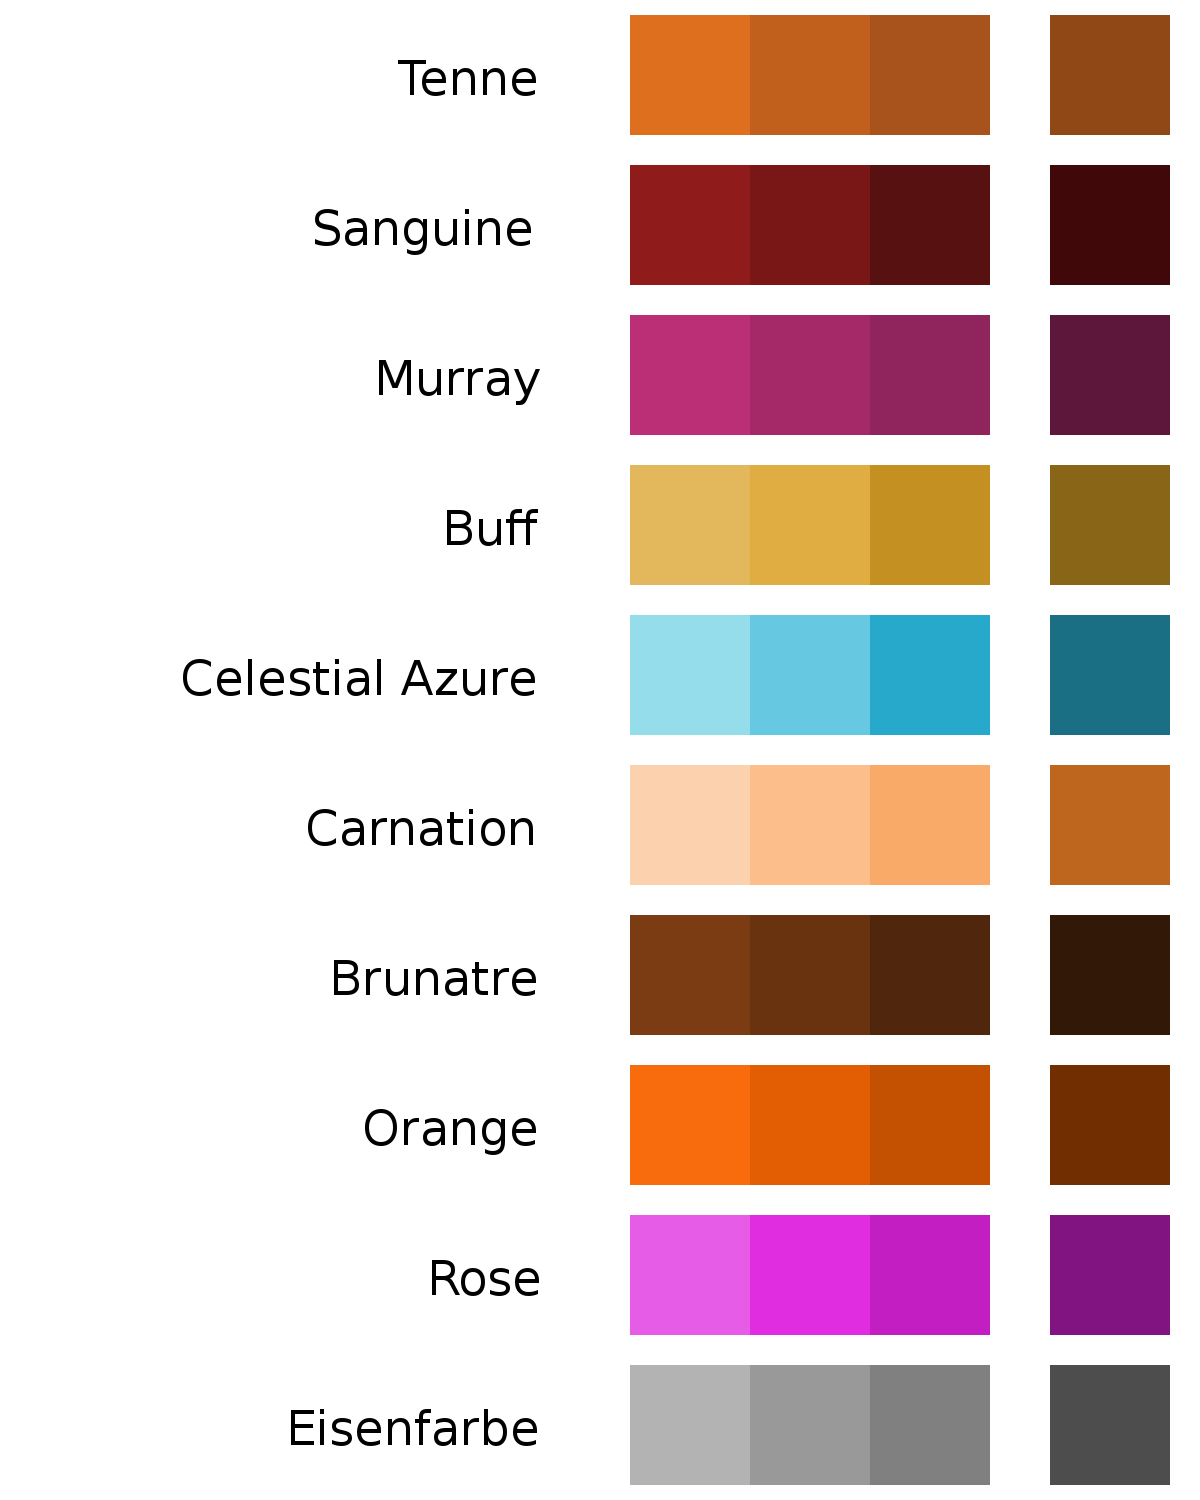 https://upload.wikimedia.org/wikipedia/commons/thumb/d/df/Sodacan_uncommon_color_palette.svg/1200px-Sodacan_uncommon_color_palette.svg.png